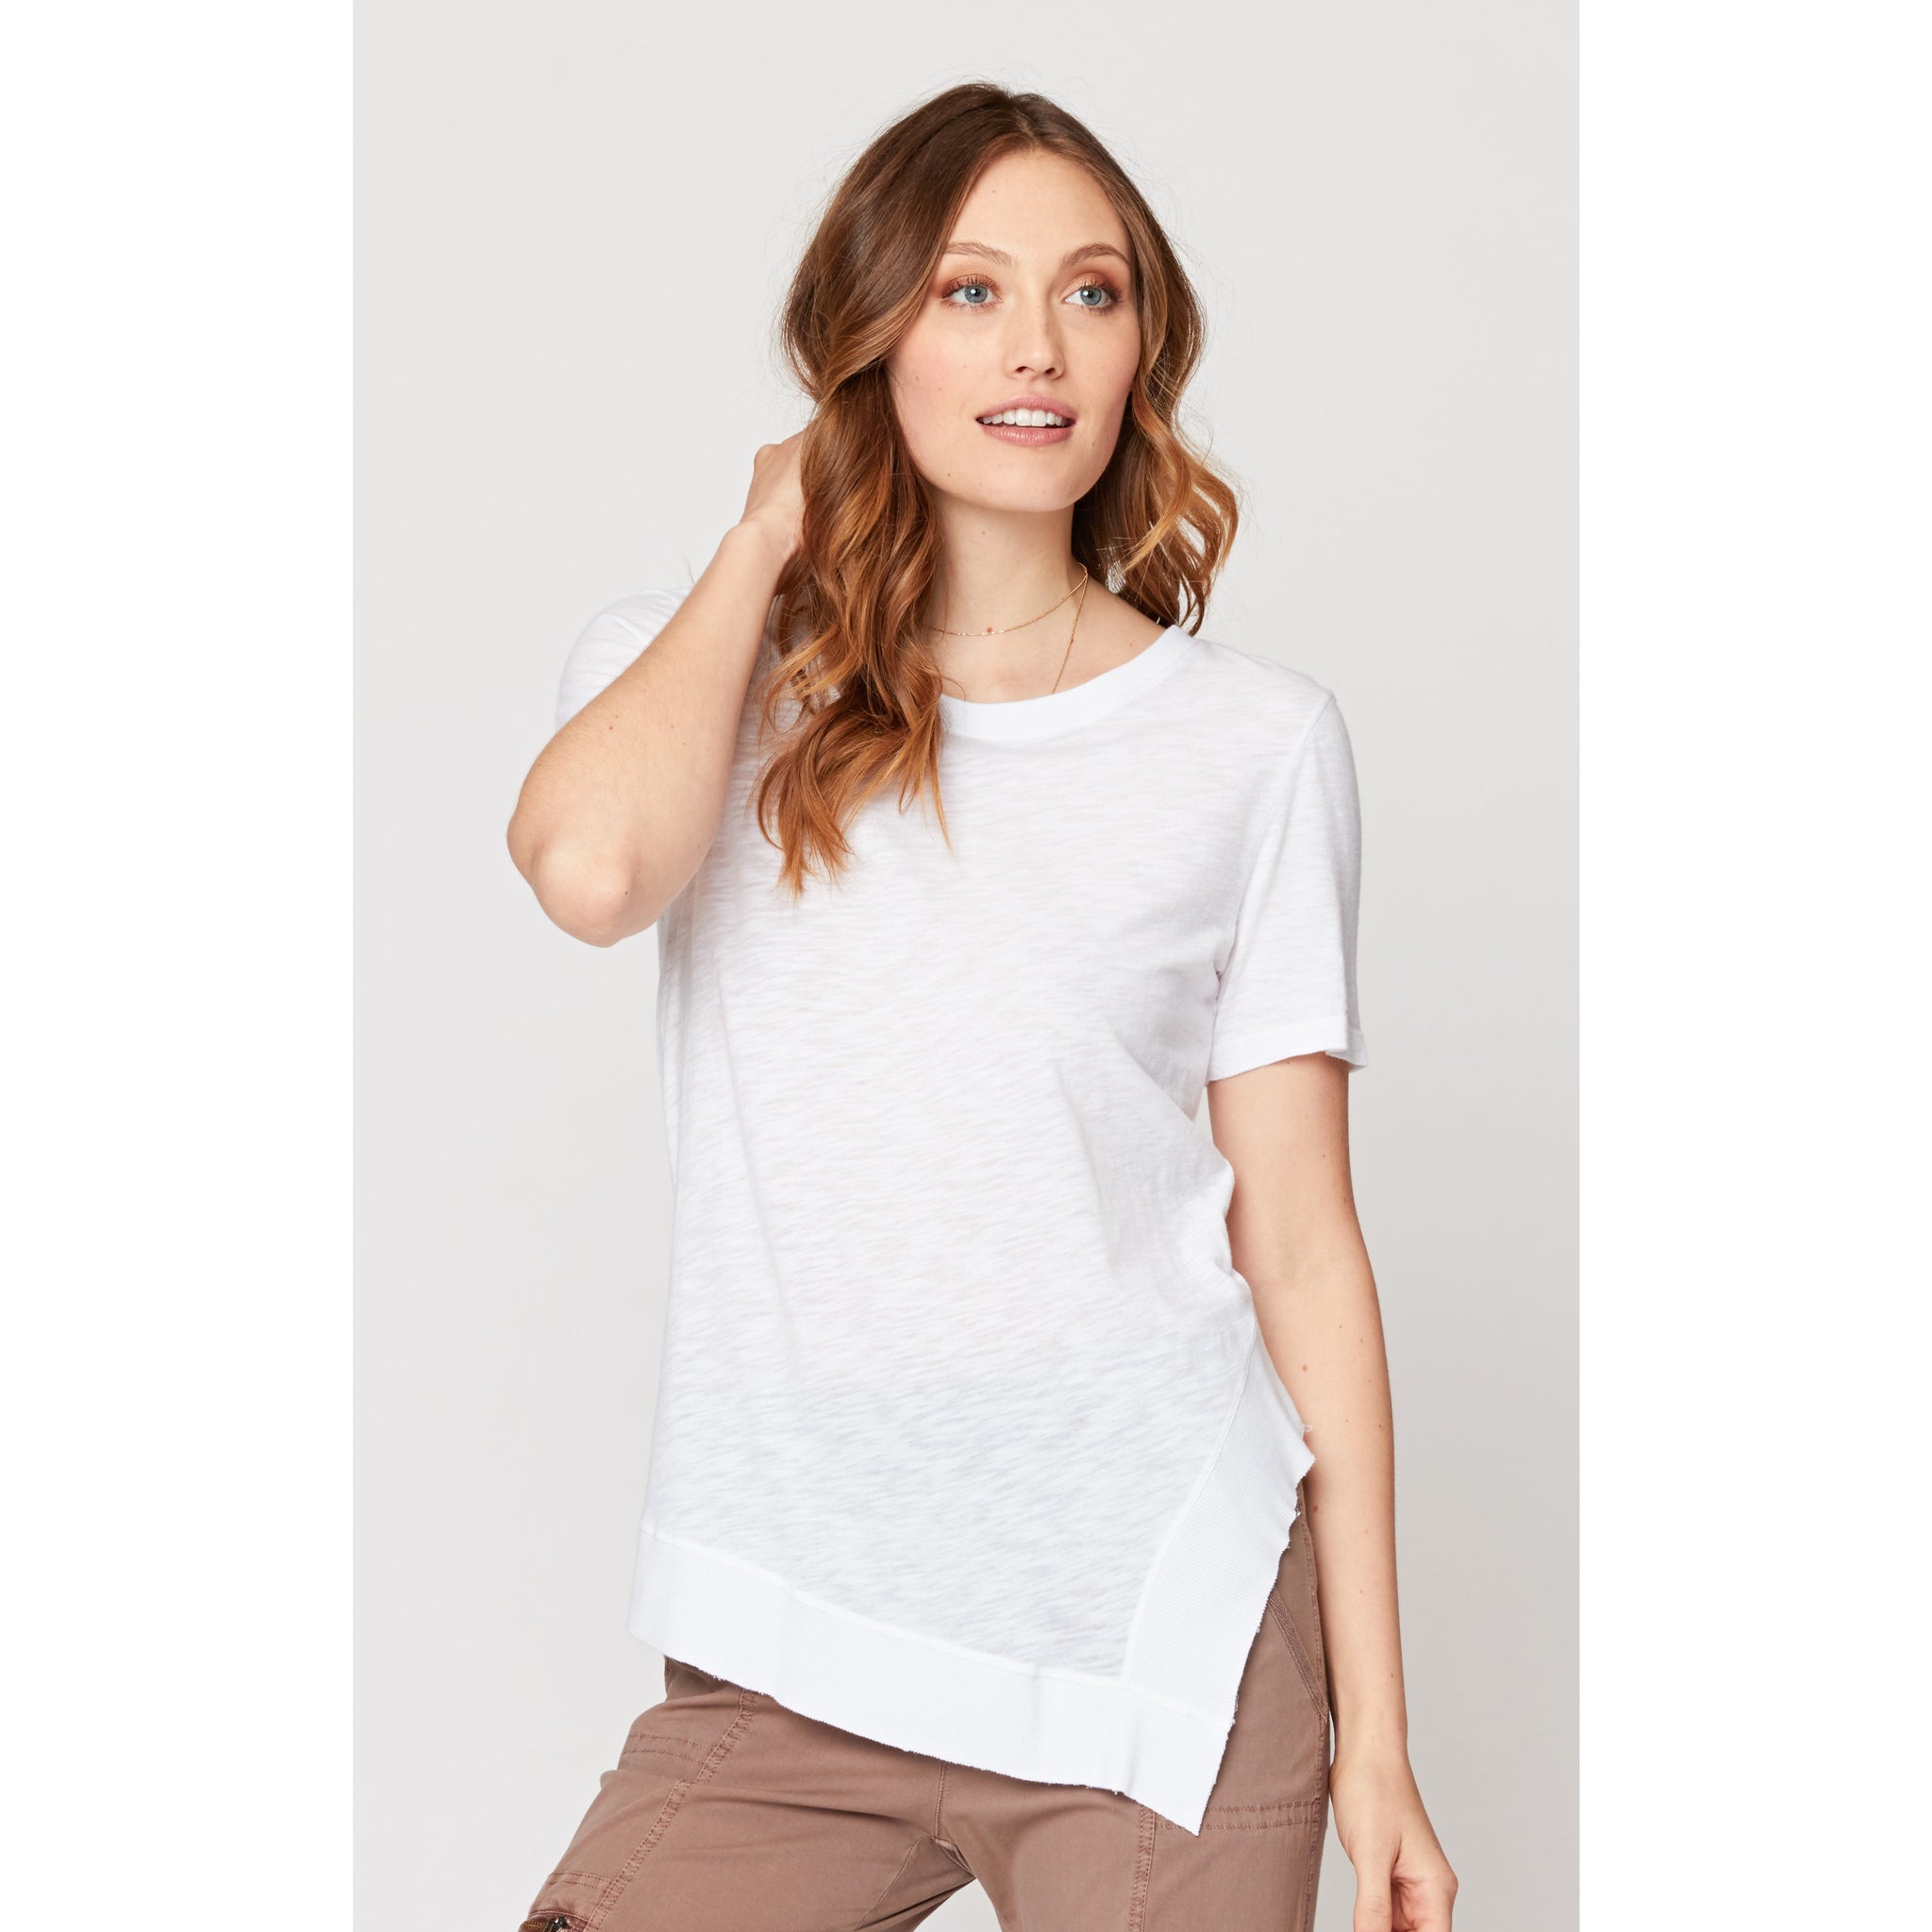 The Wearables Lettie Tee in White